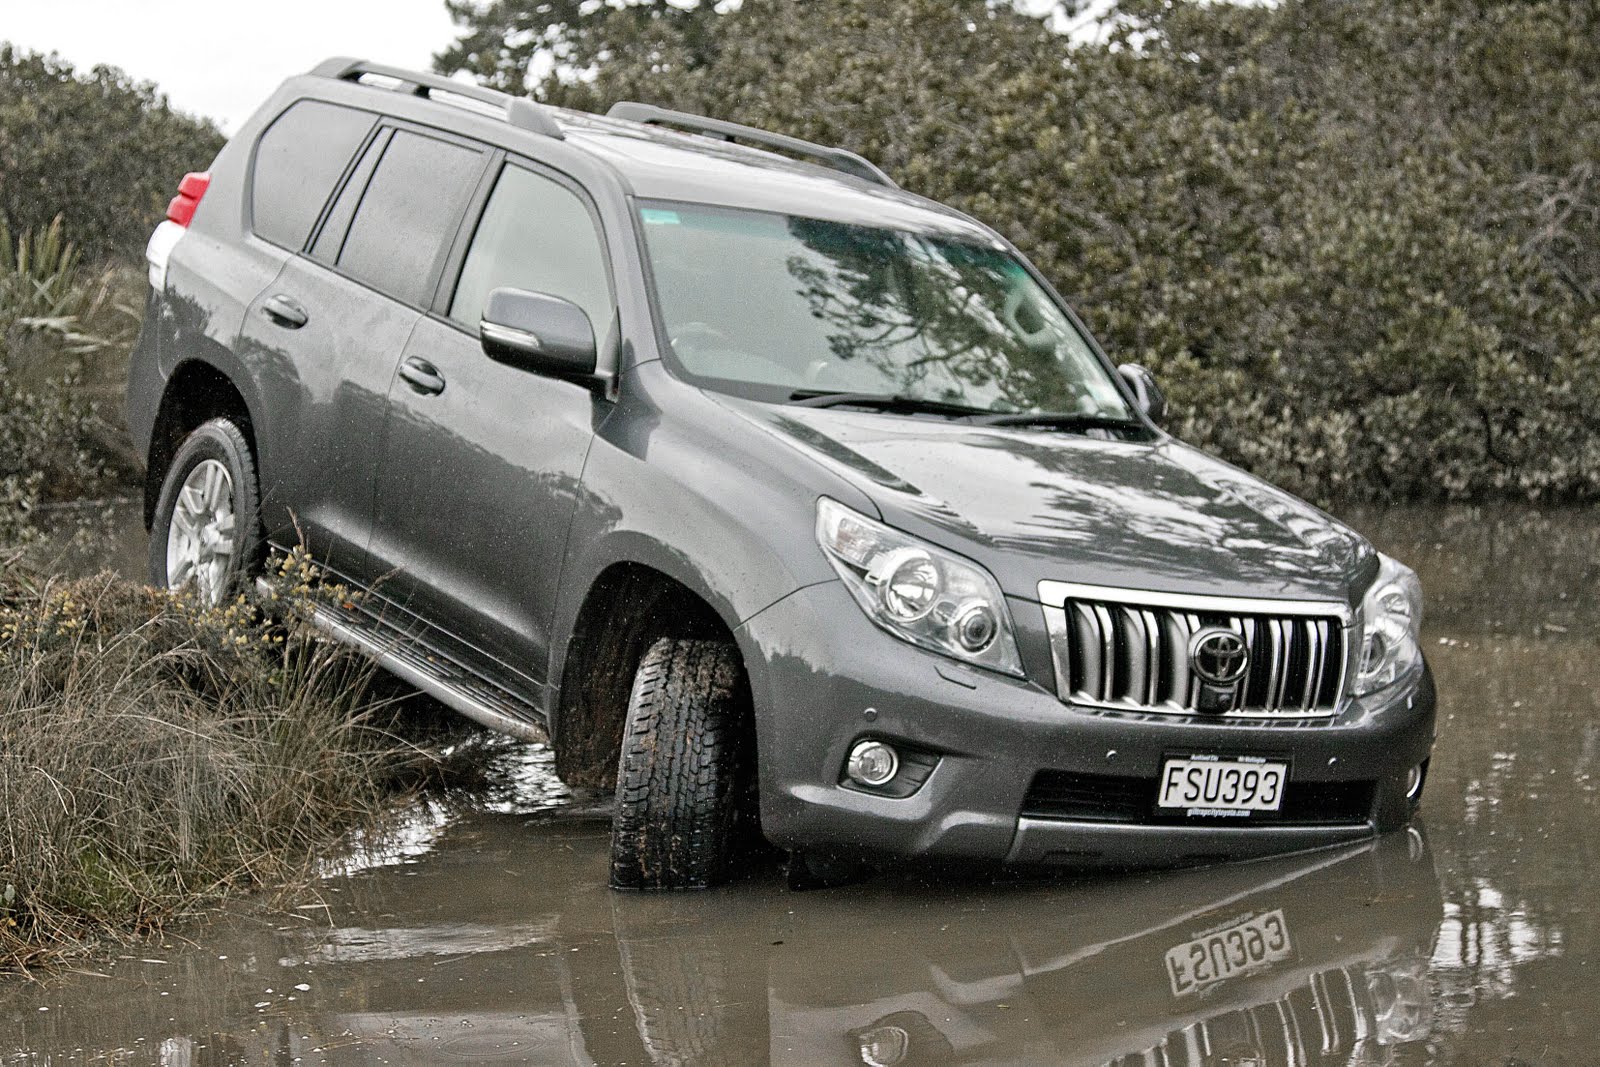 4WD Newz: Great engine, pity about the fuel prices